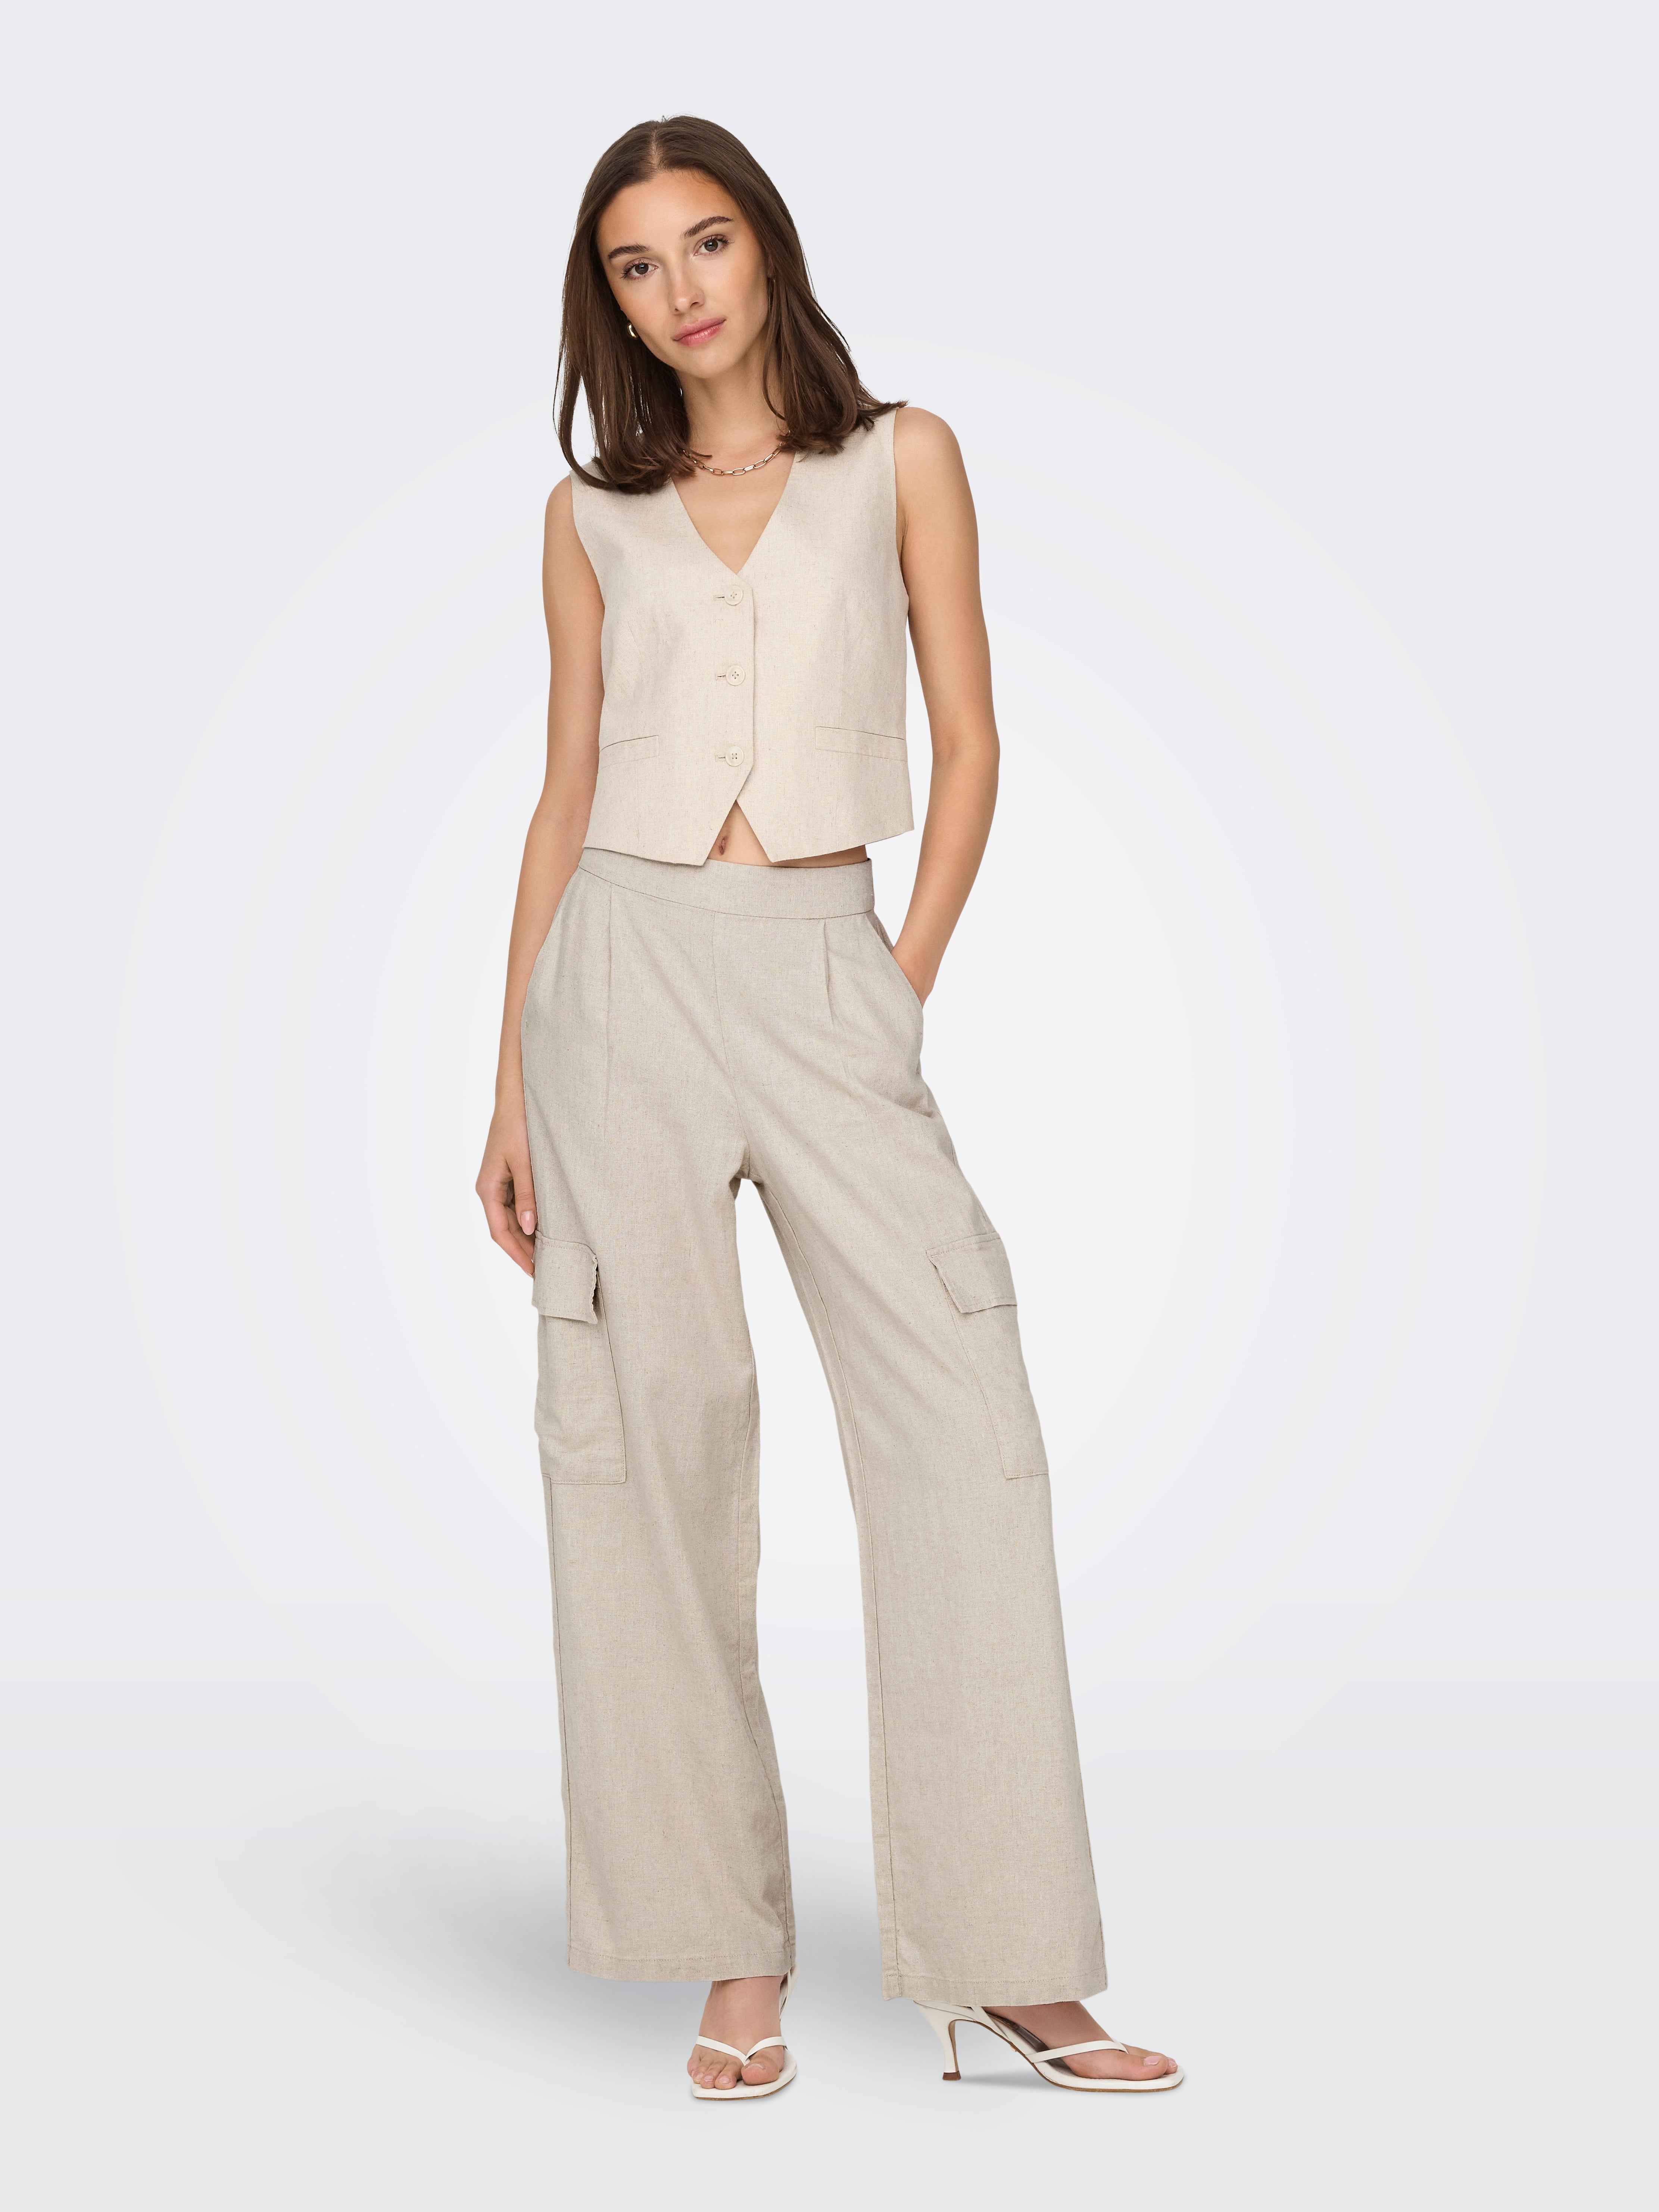 Trousers with wide leg fit and high waist